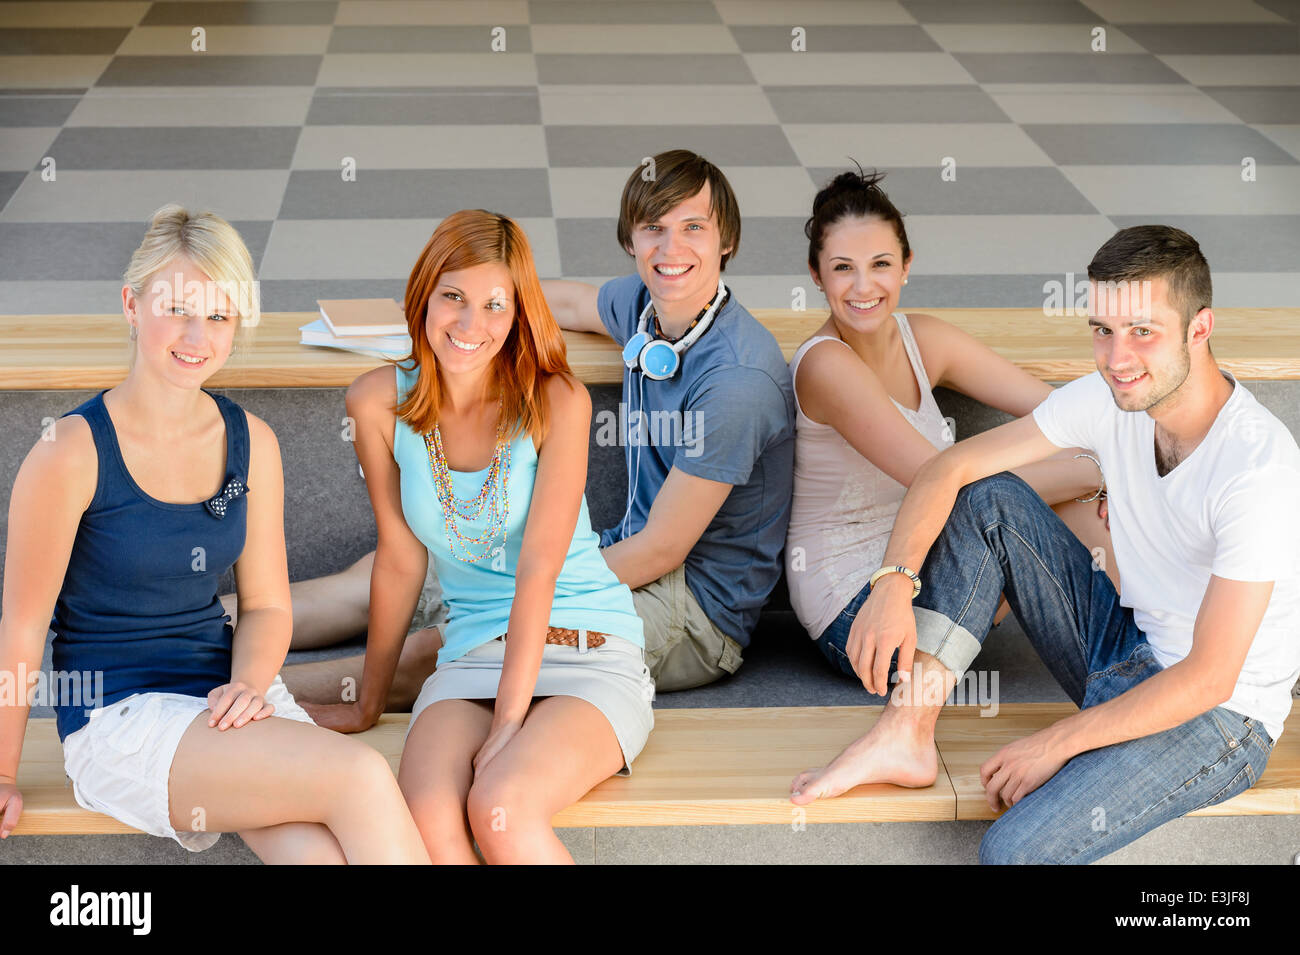 Group of college student friends sitting on bench looking camera Stock Photo